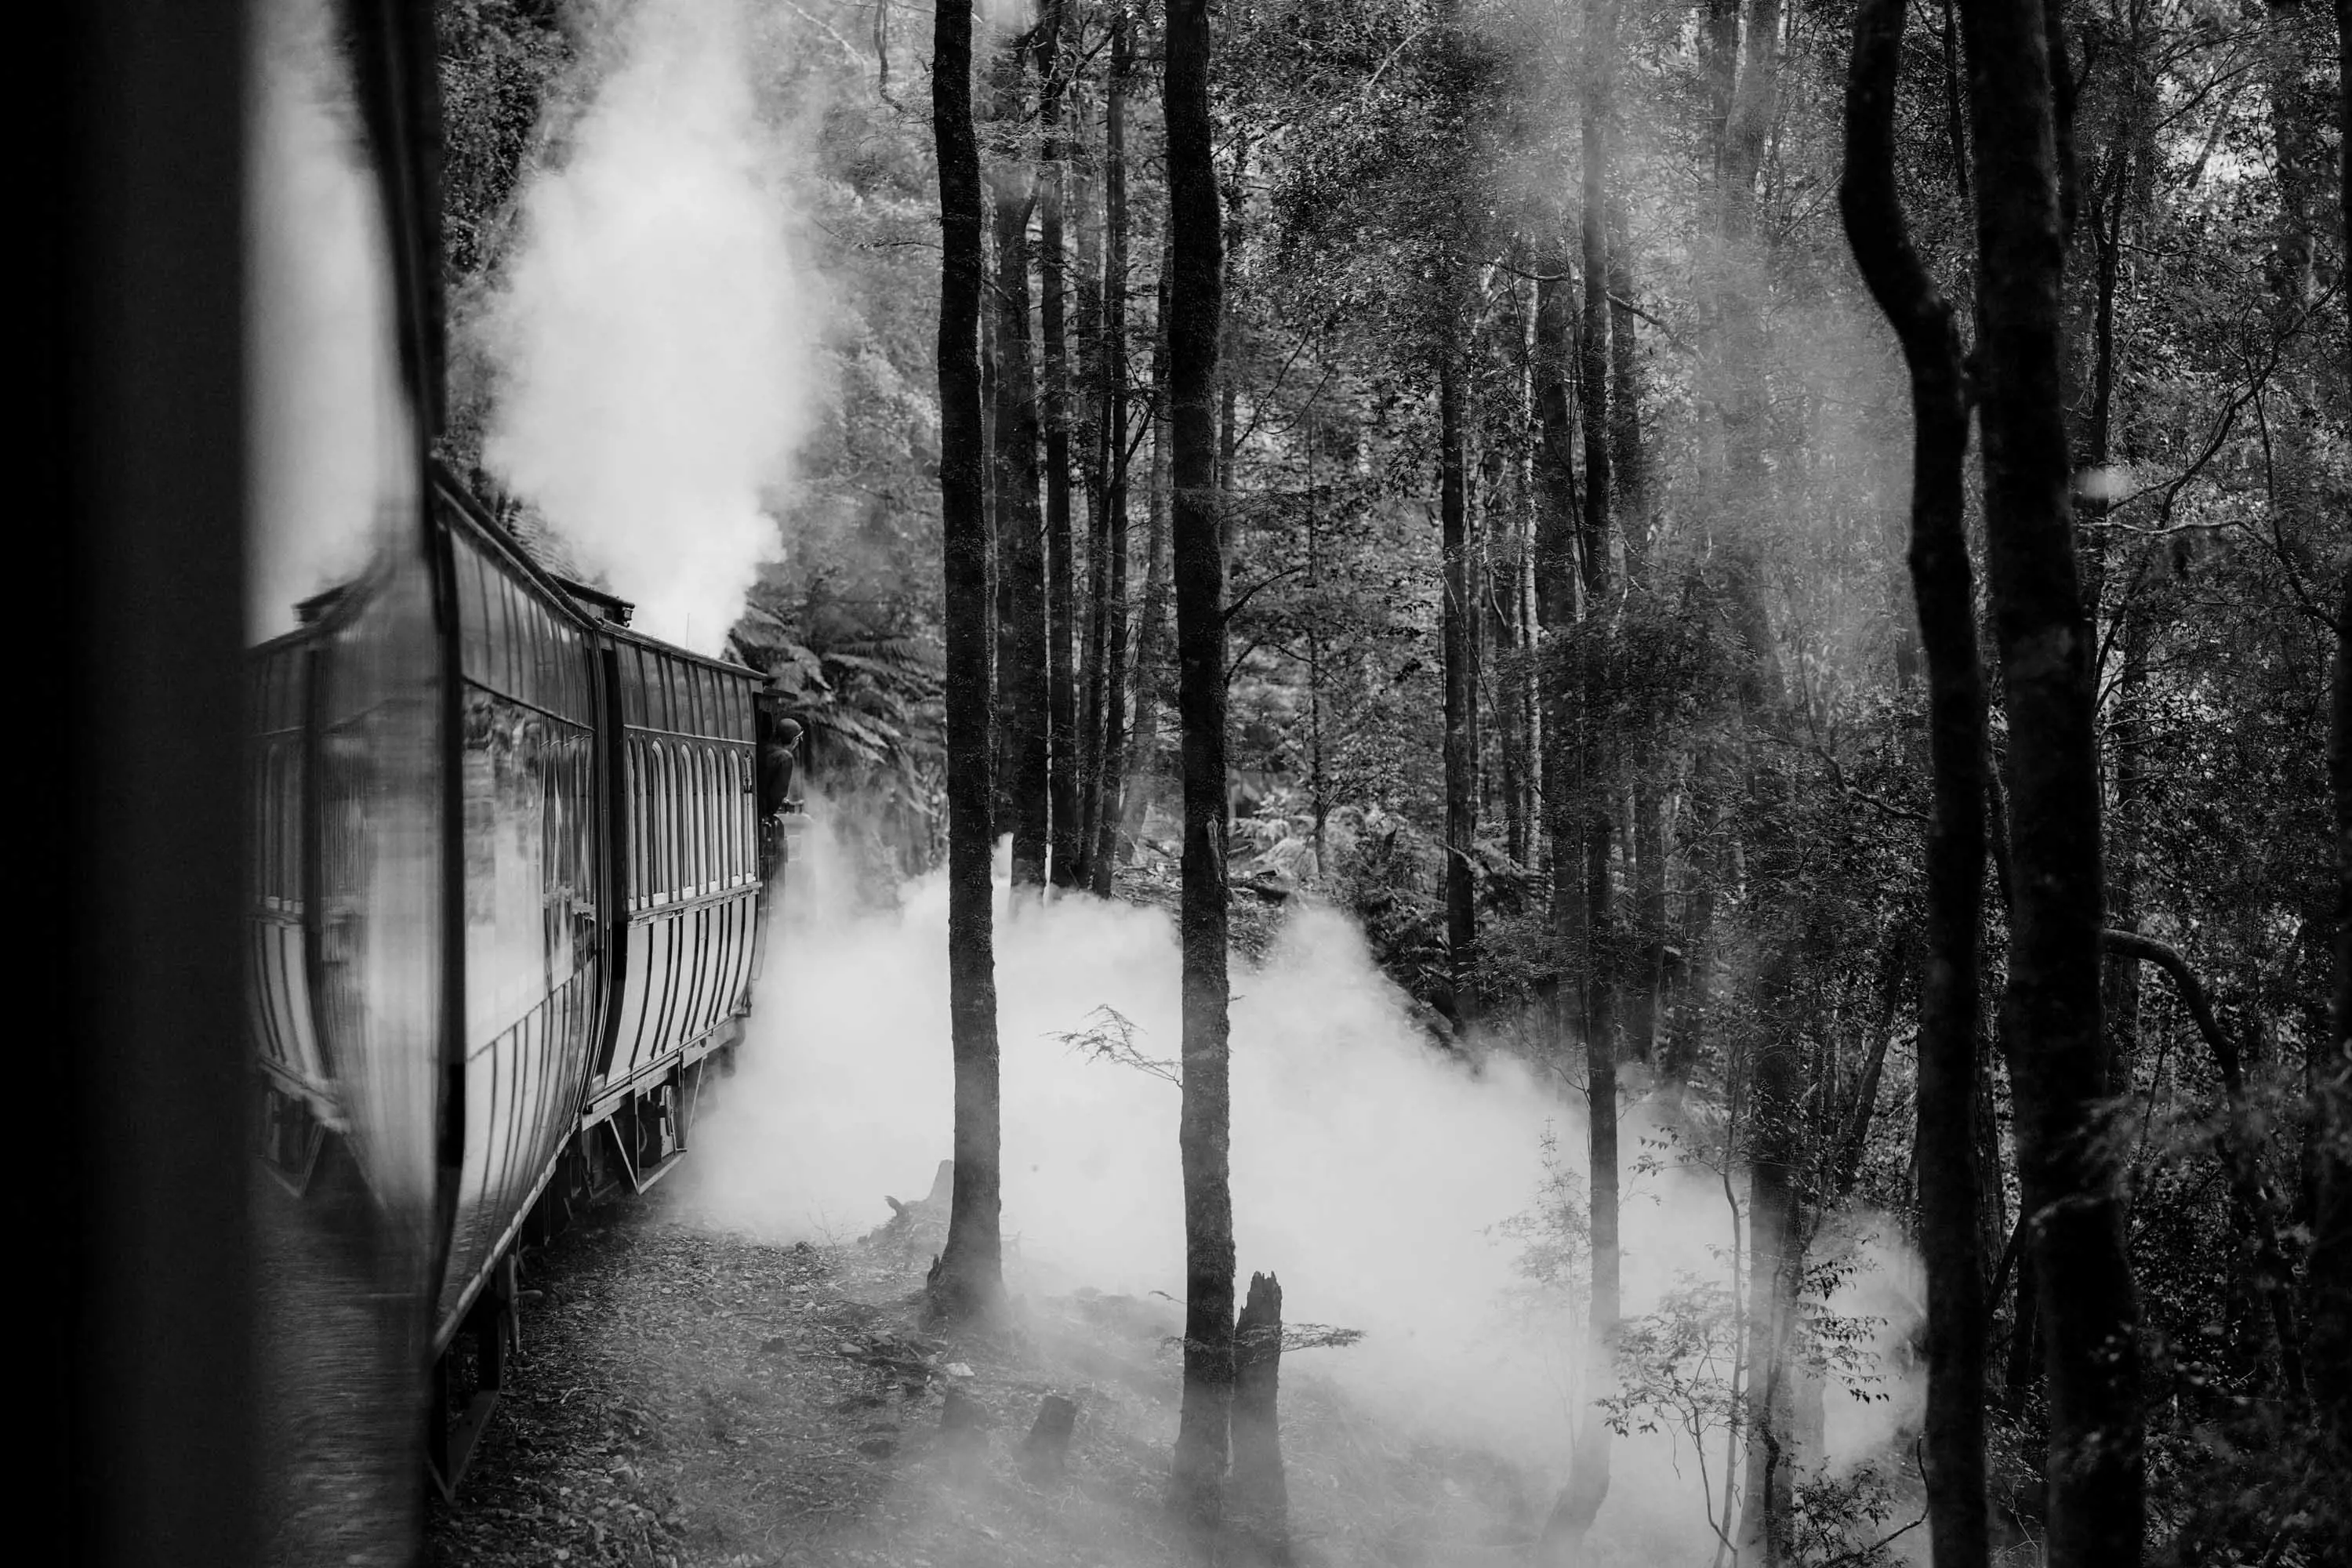 Several train carriages turn gently through a bend between tall, thin trees in a dense forest, while steam from the train drifts through the undergrowth.